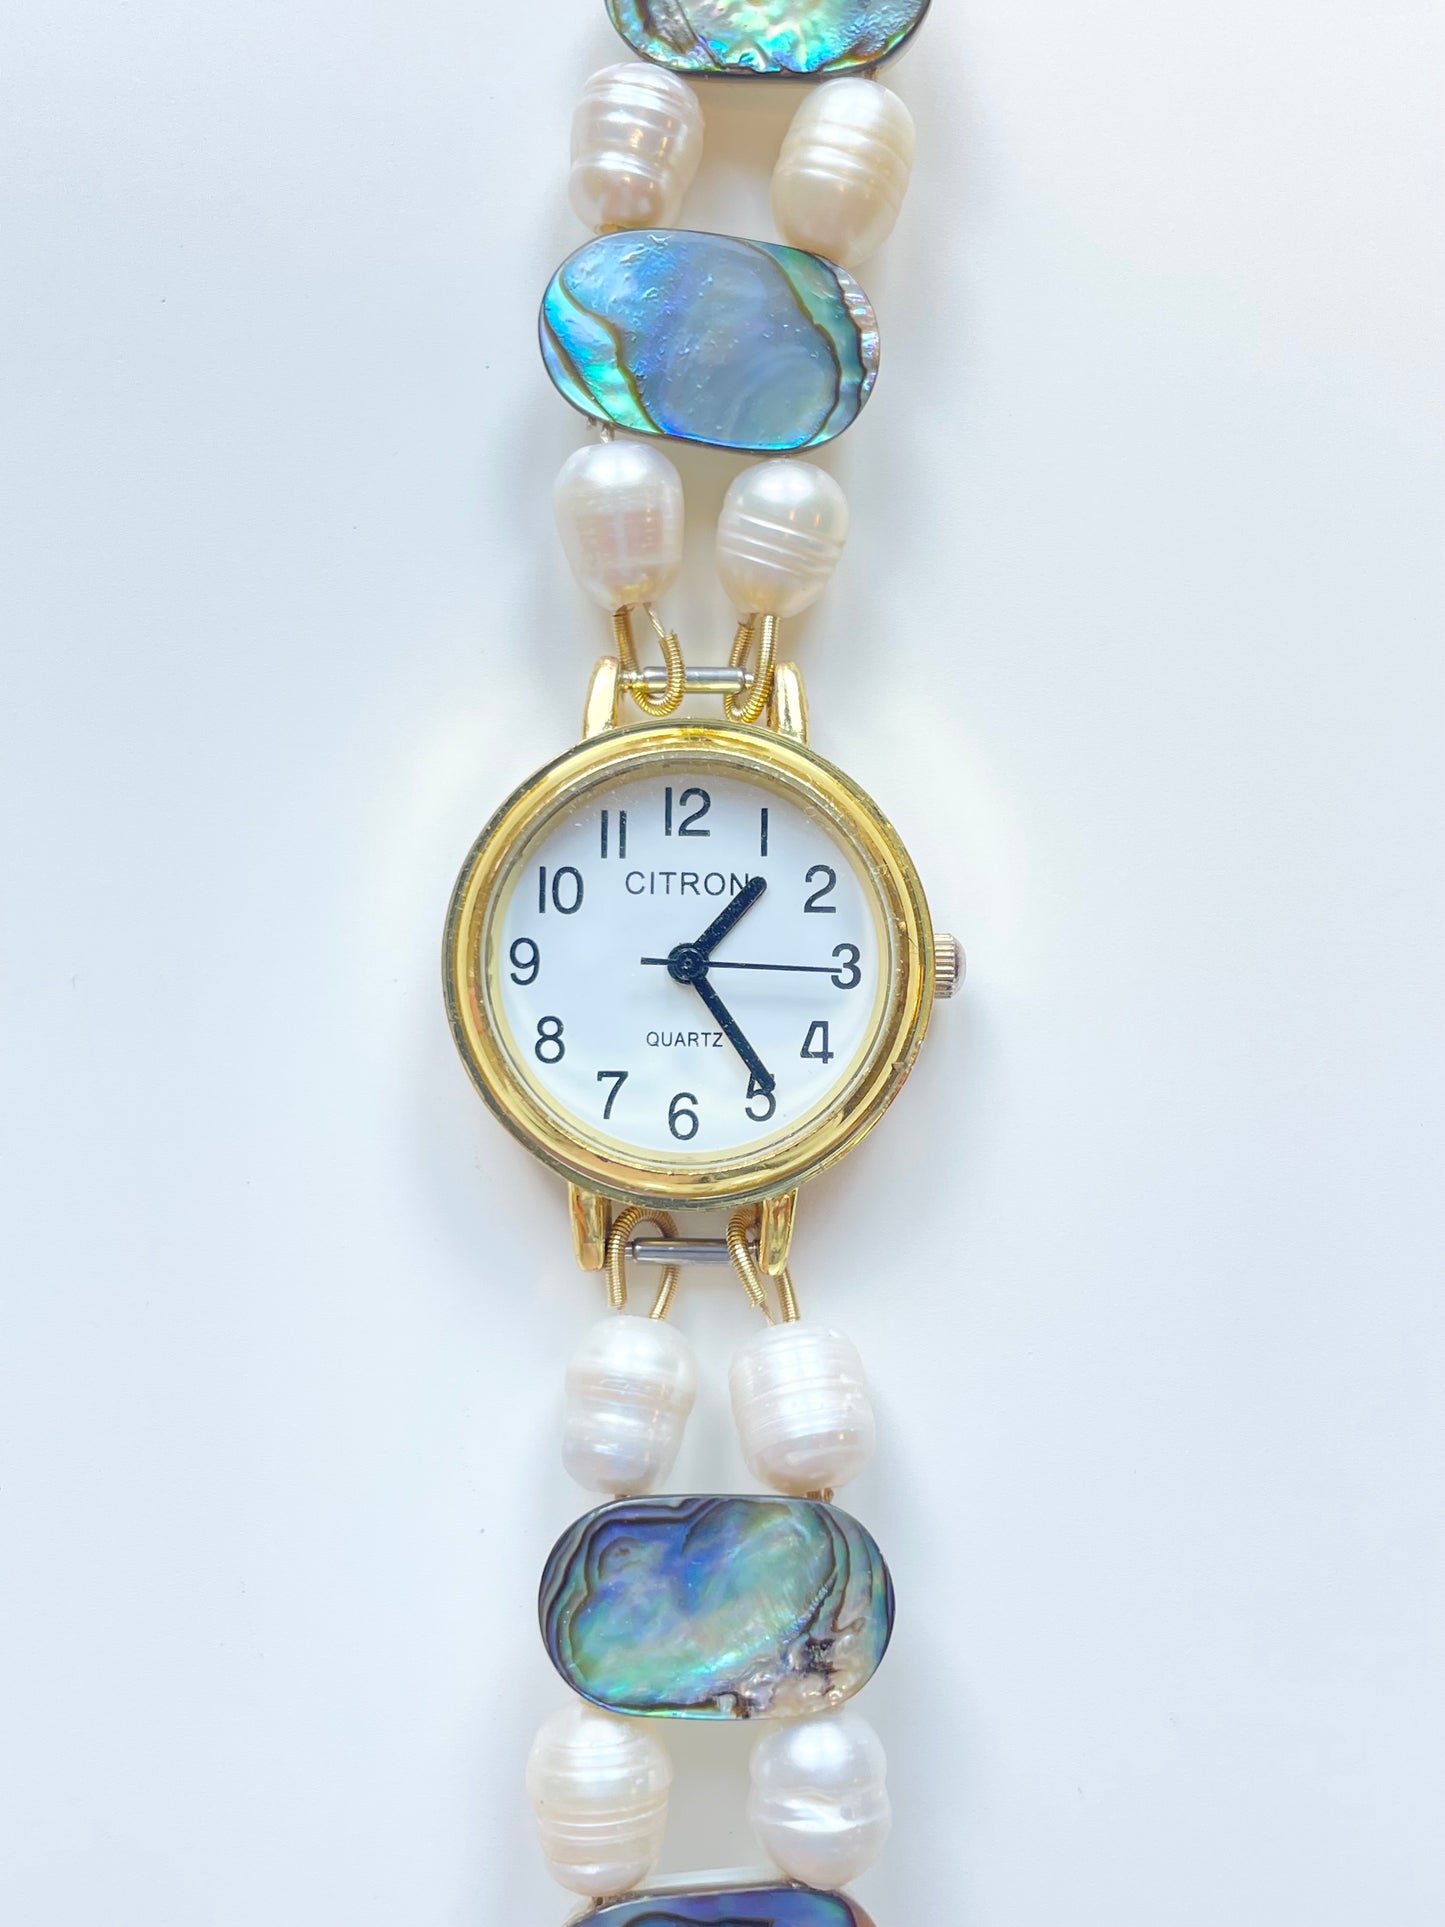 The Abalone & Pearl Watch